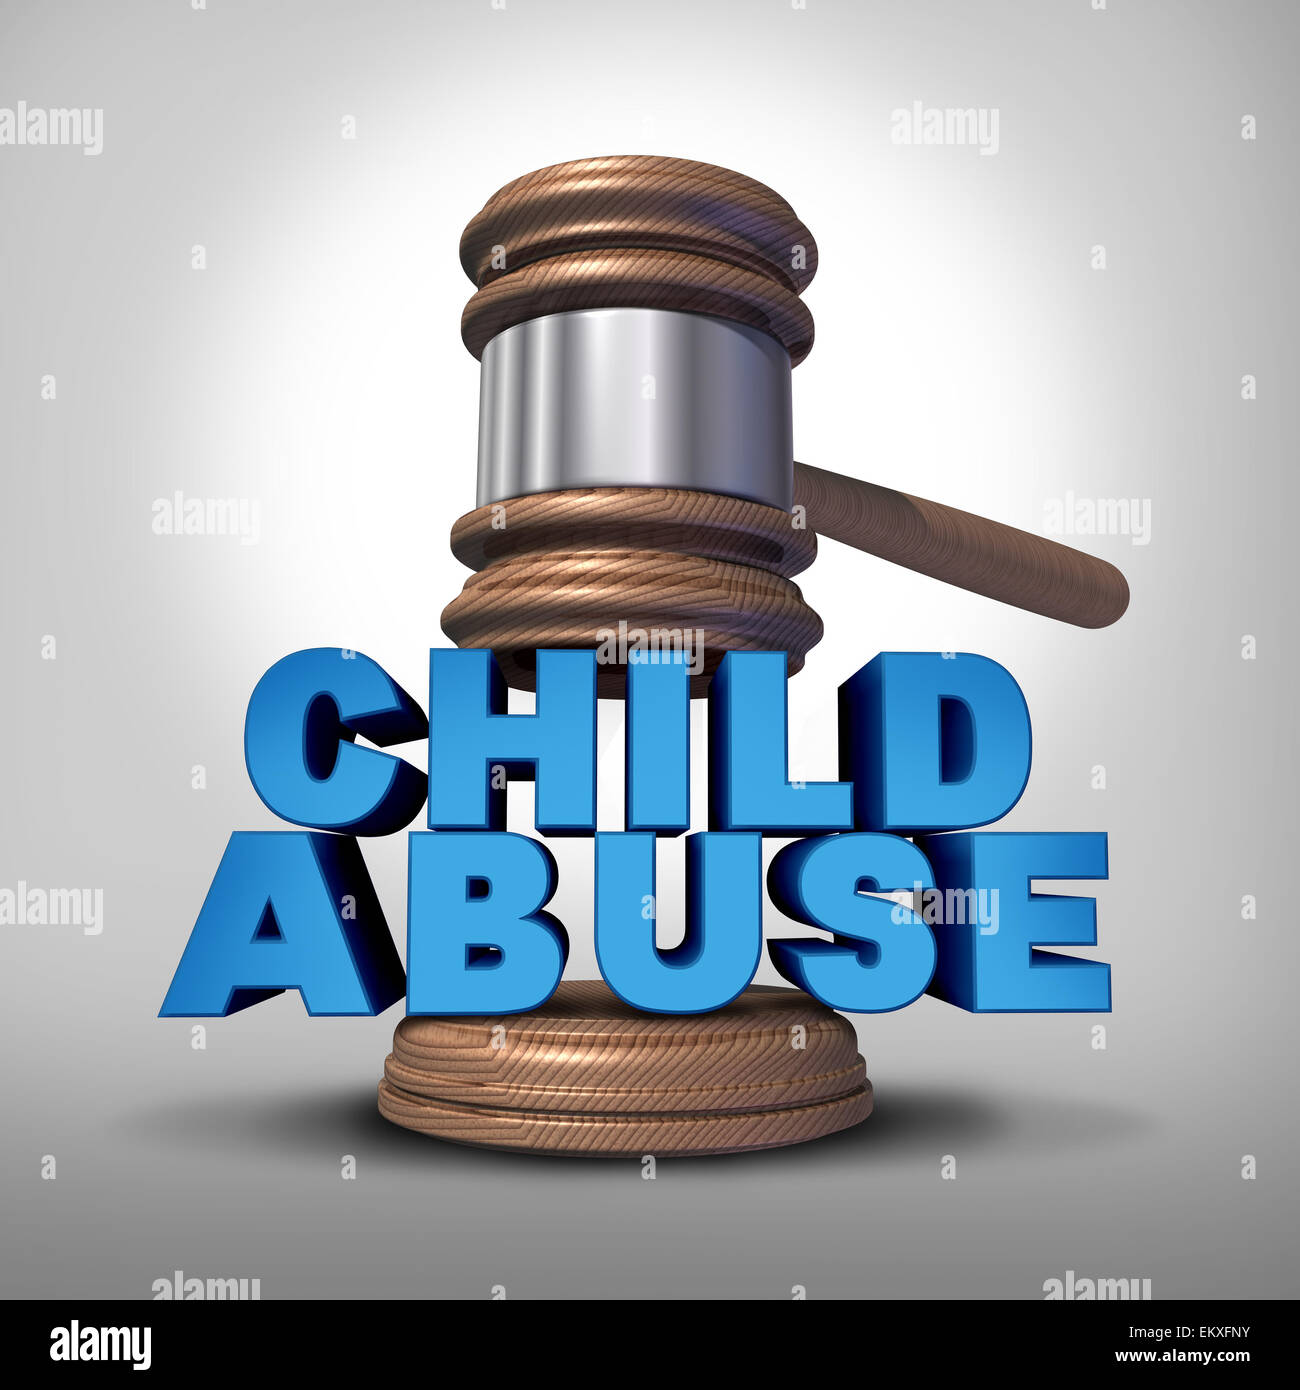 Child abuse concept and criminal abusive mistreatment of children symbol as a justice judge gavel or mallet coming down on the words that represent the criminal act of neglect and violence on kids. Stock Photo